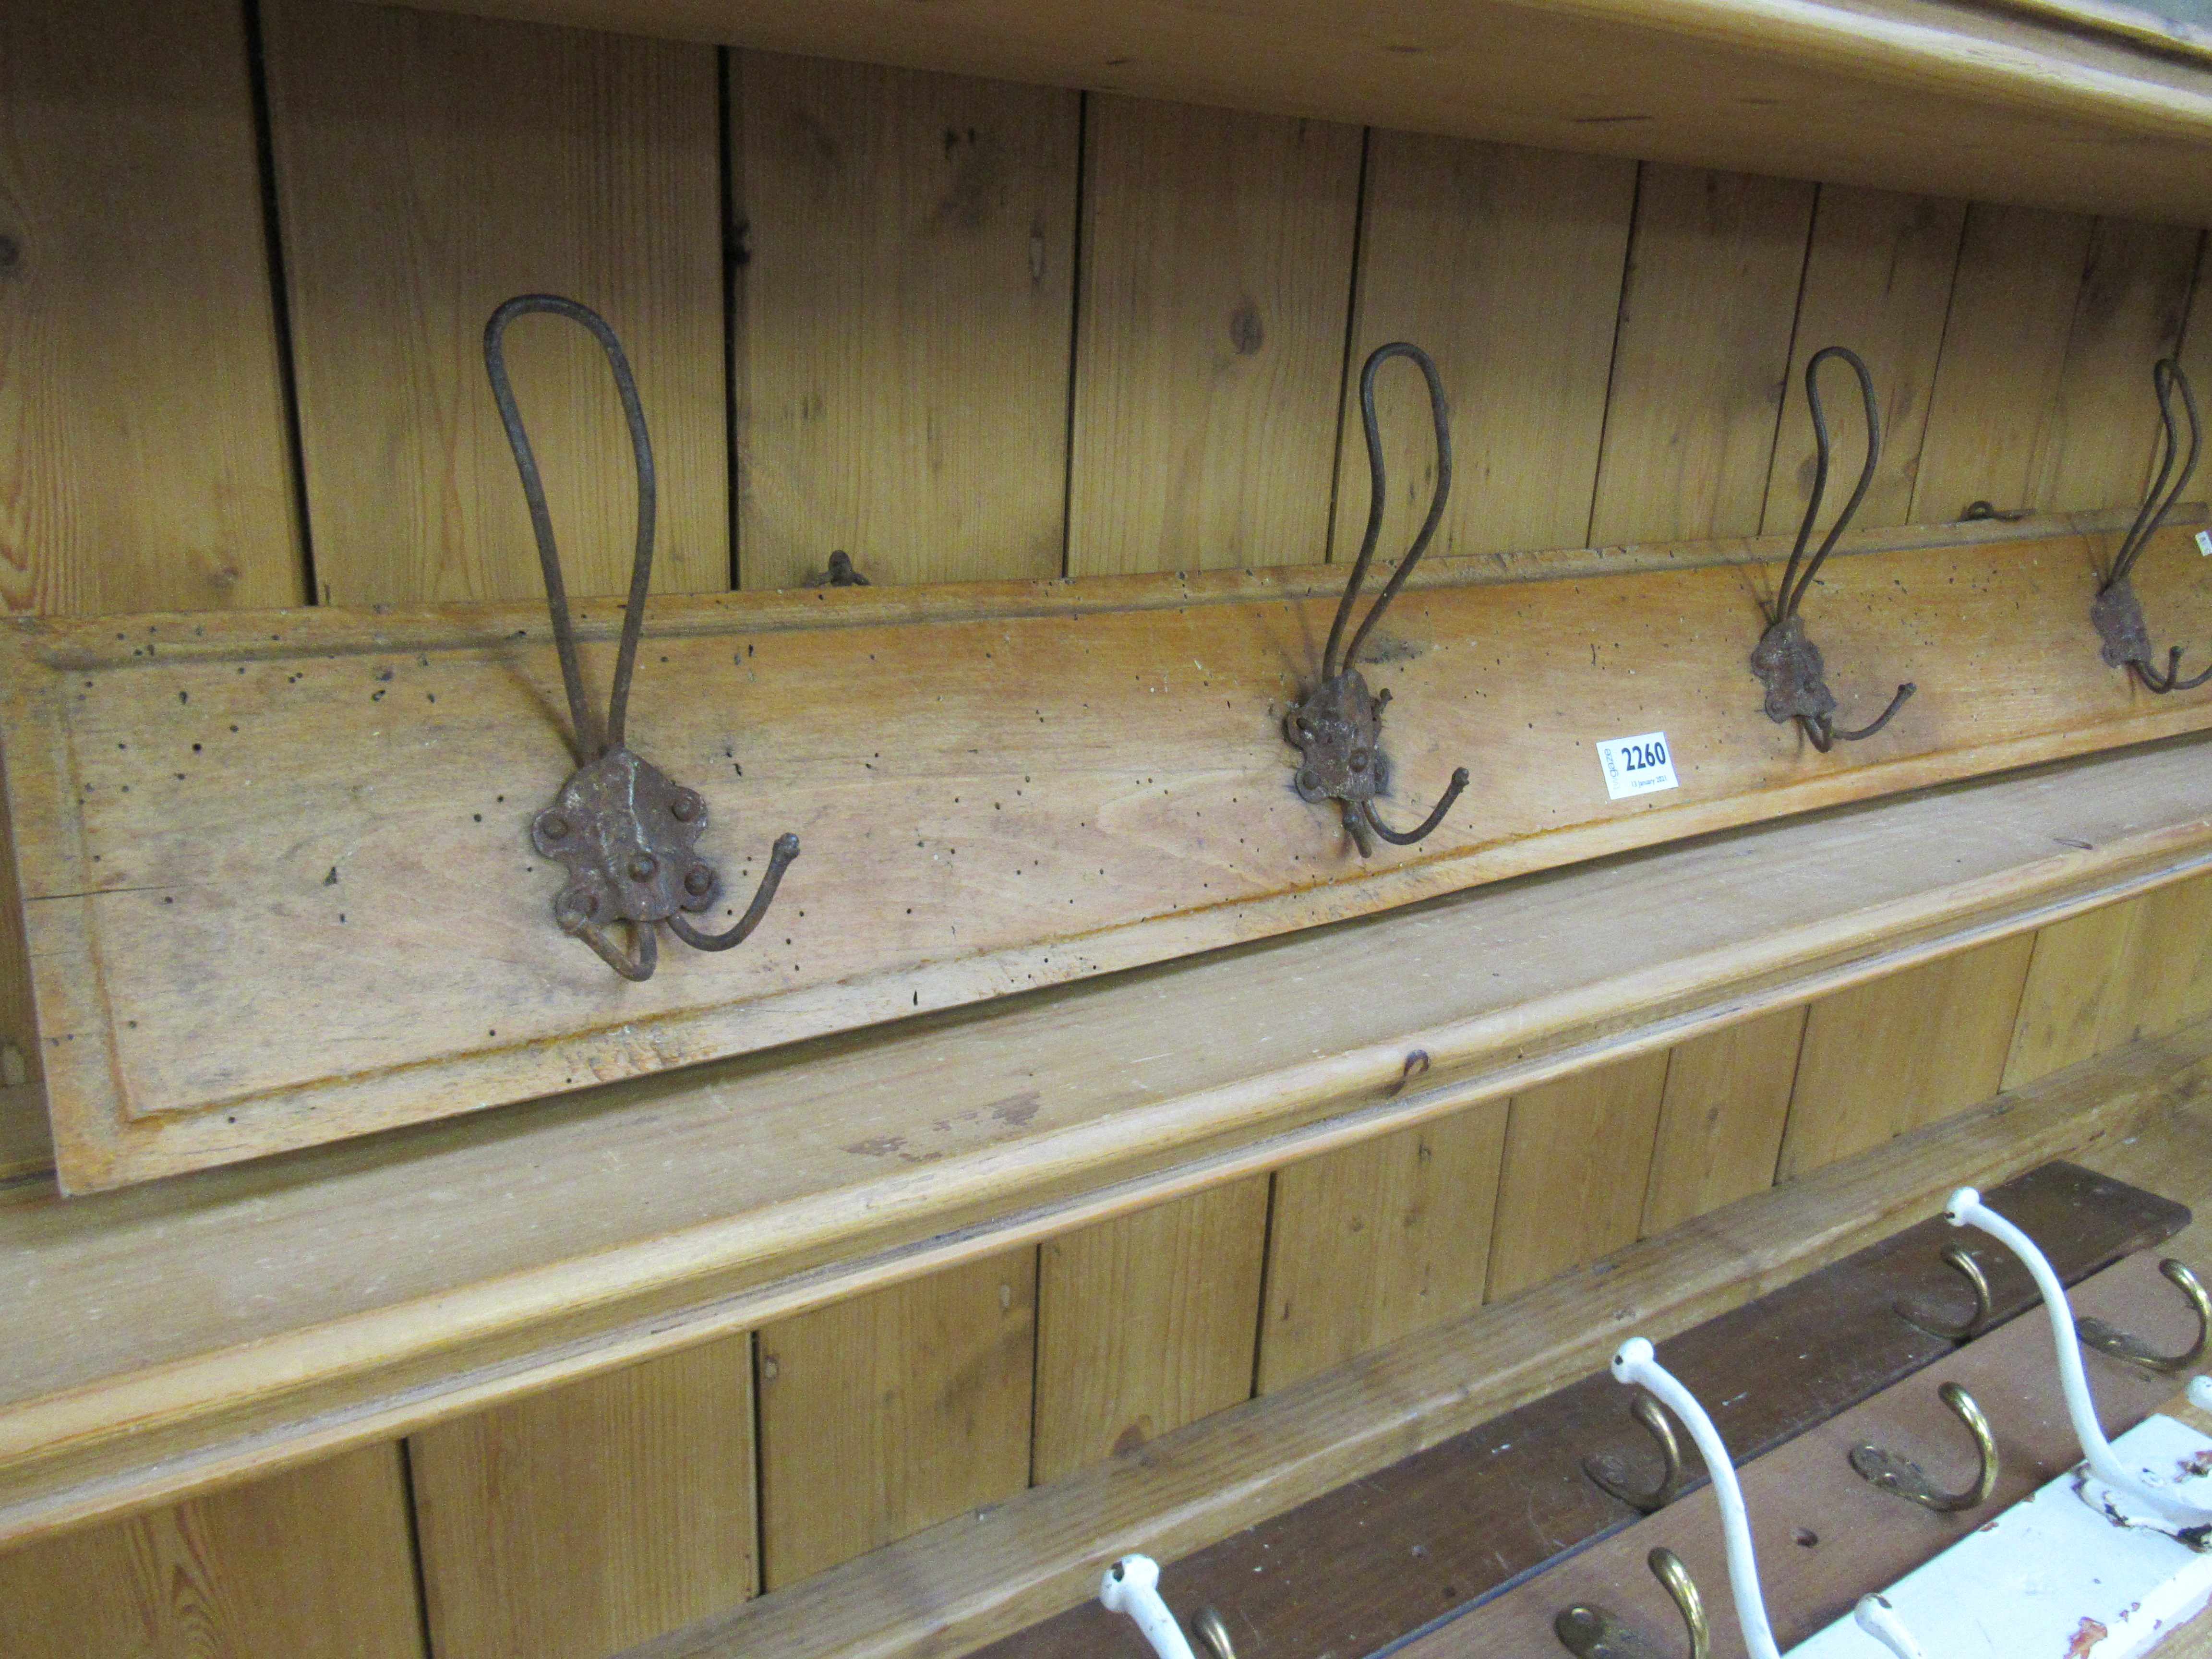 Four wire coat hooks on timber rail